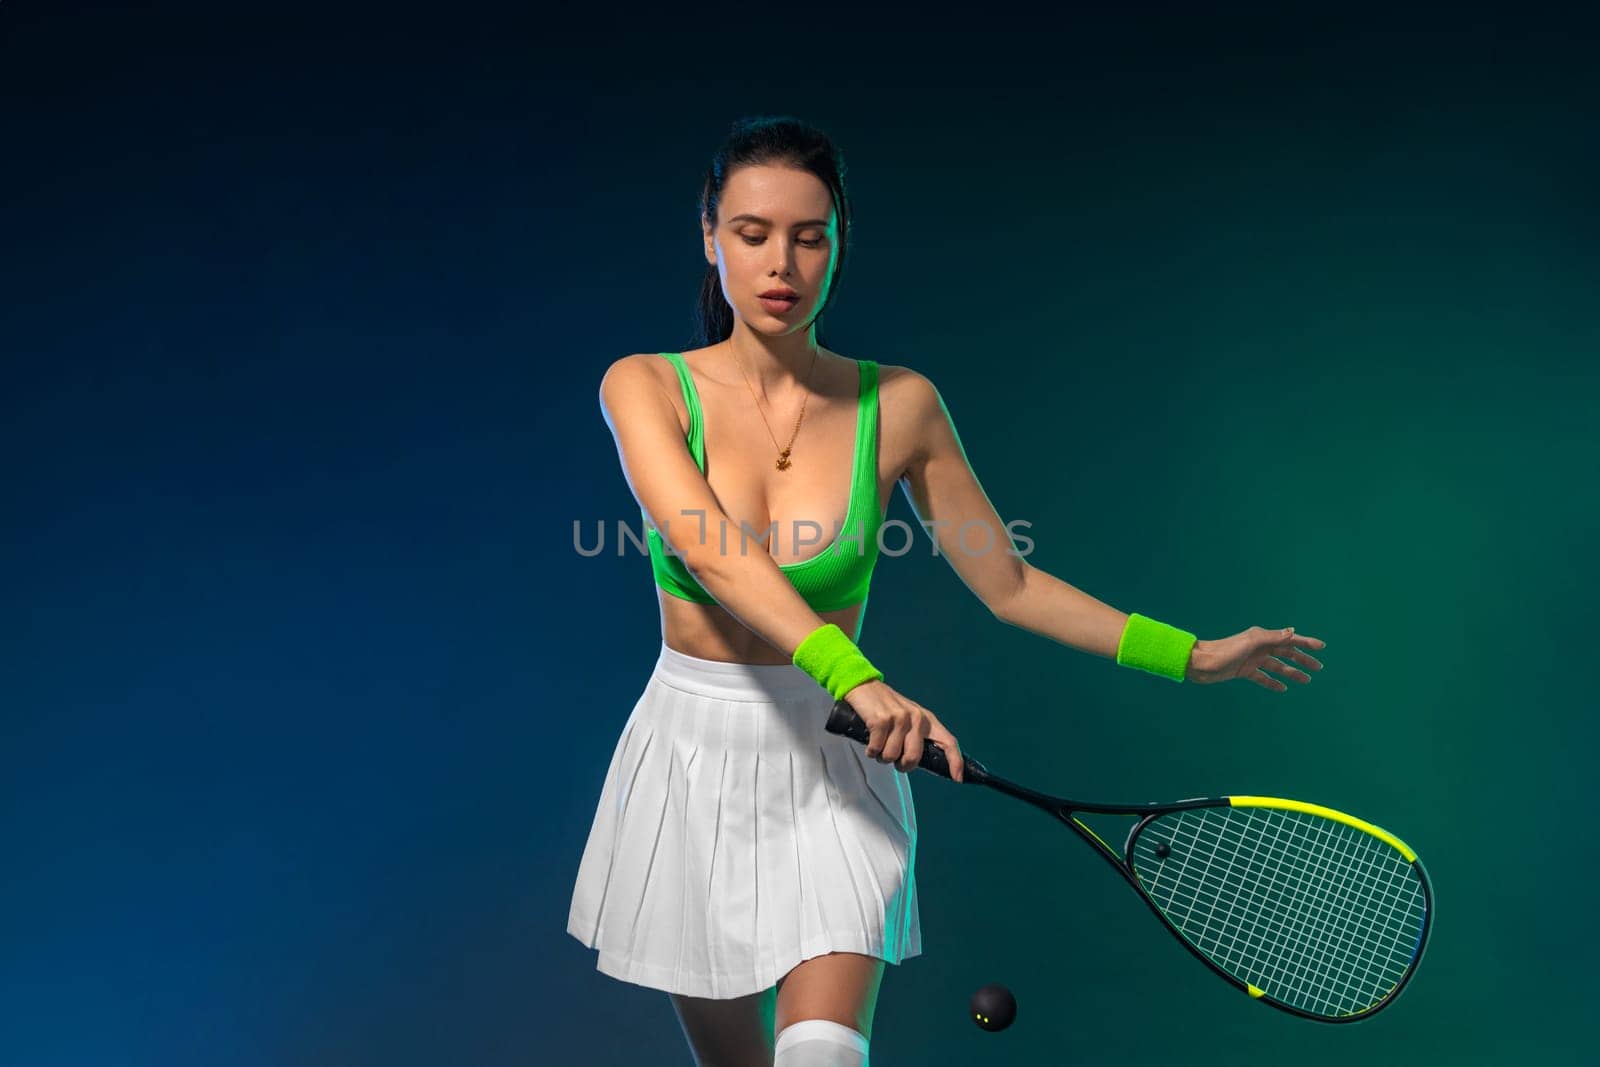 Squash player on a squash court with racket. Man athlete with racket on court with neon colors. Sport concept. Download a high quality photo for the design of a sports app or betting site. by MikeOrlov